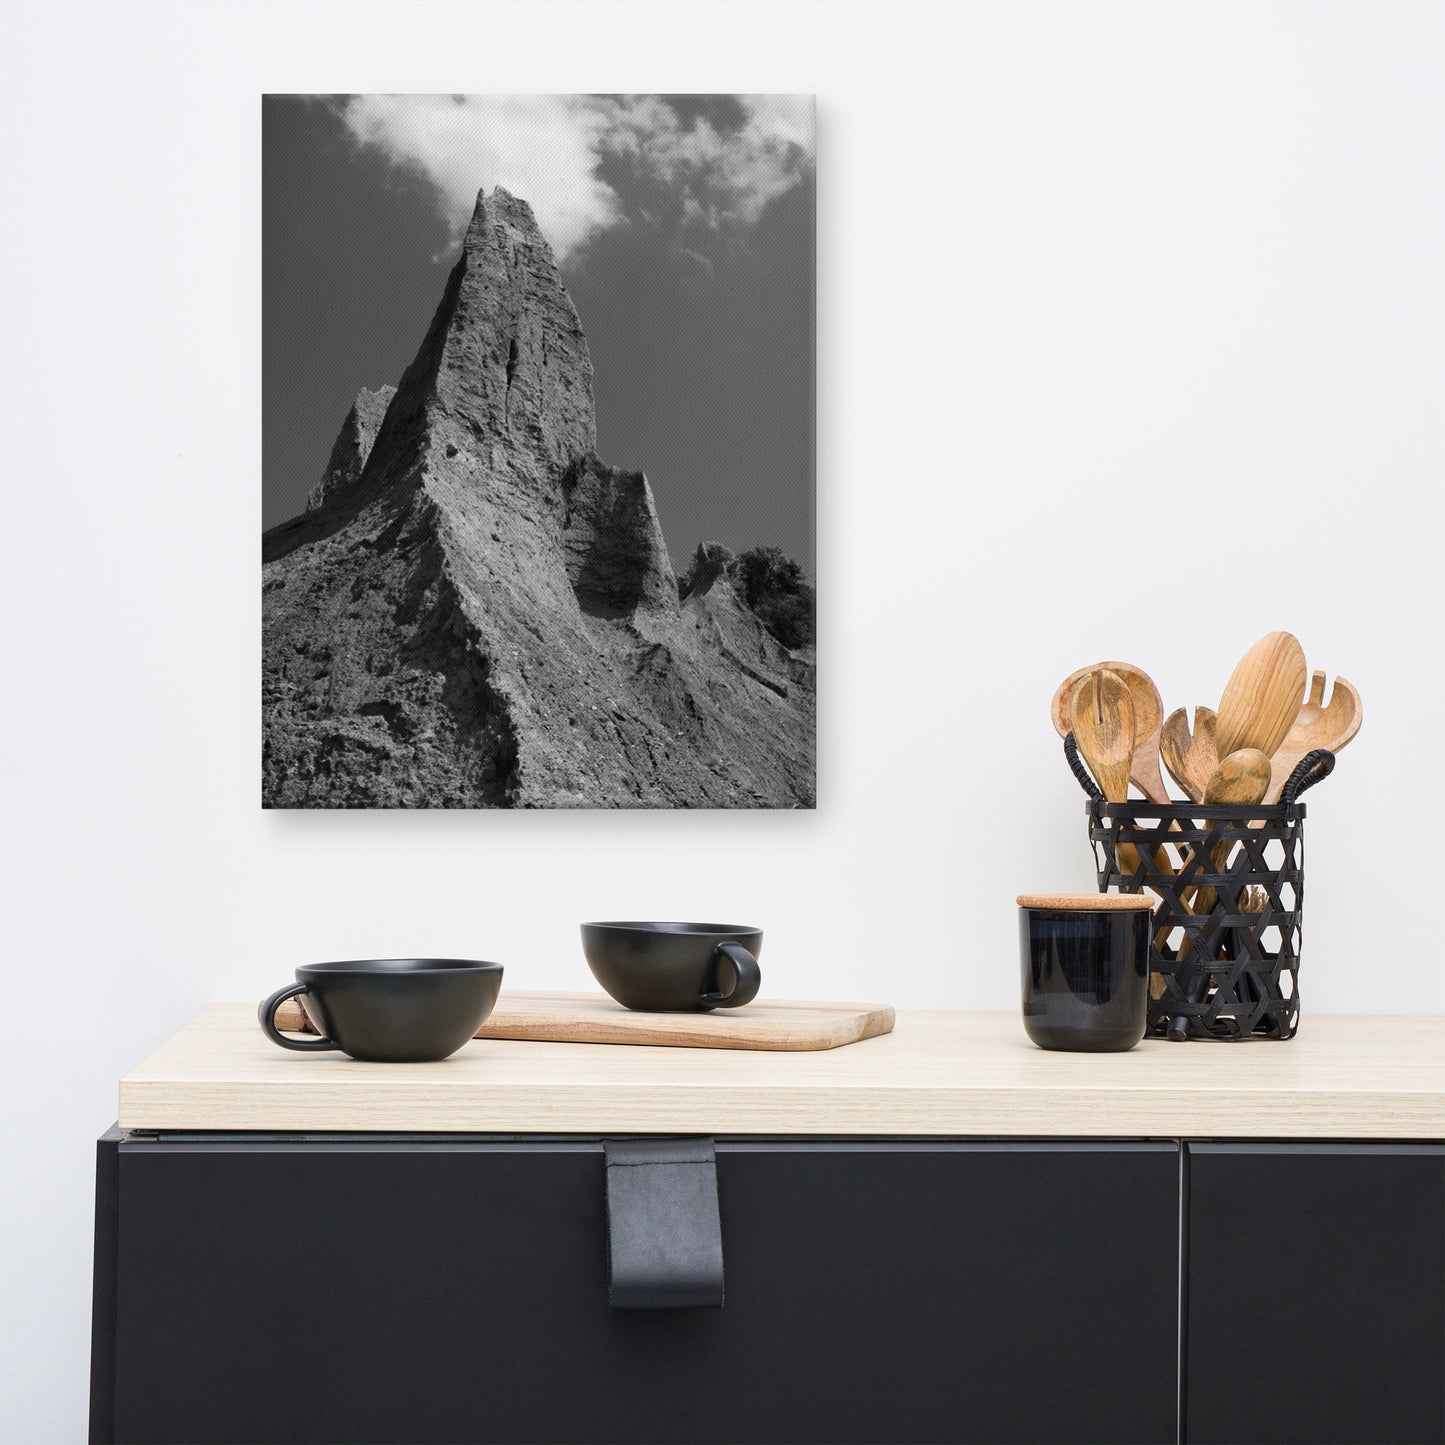 Chimney Bluff in Black and White Rural Landscape Canvas Wall Art Prints